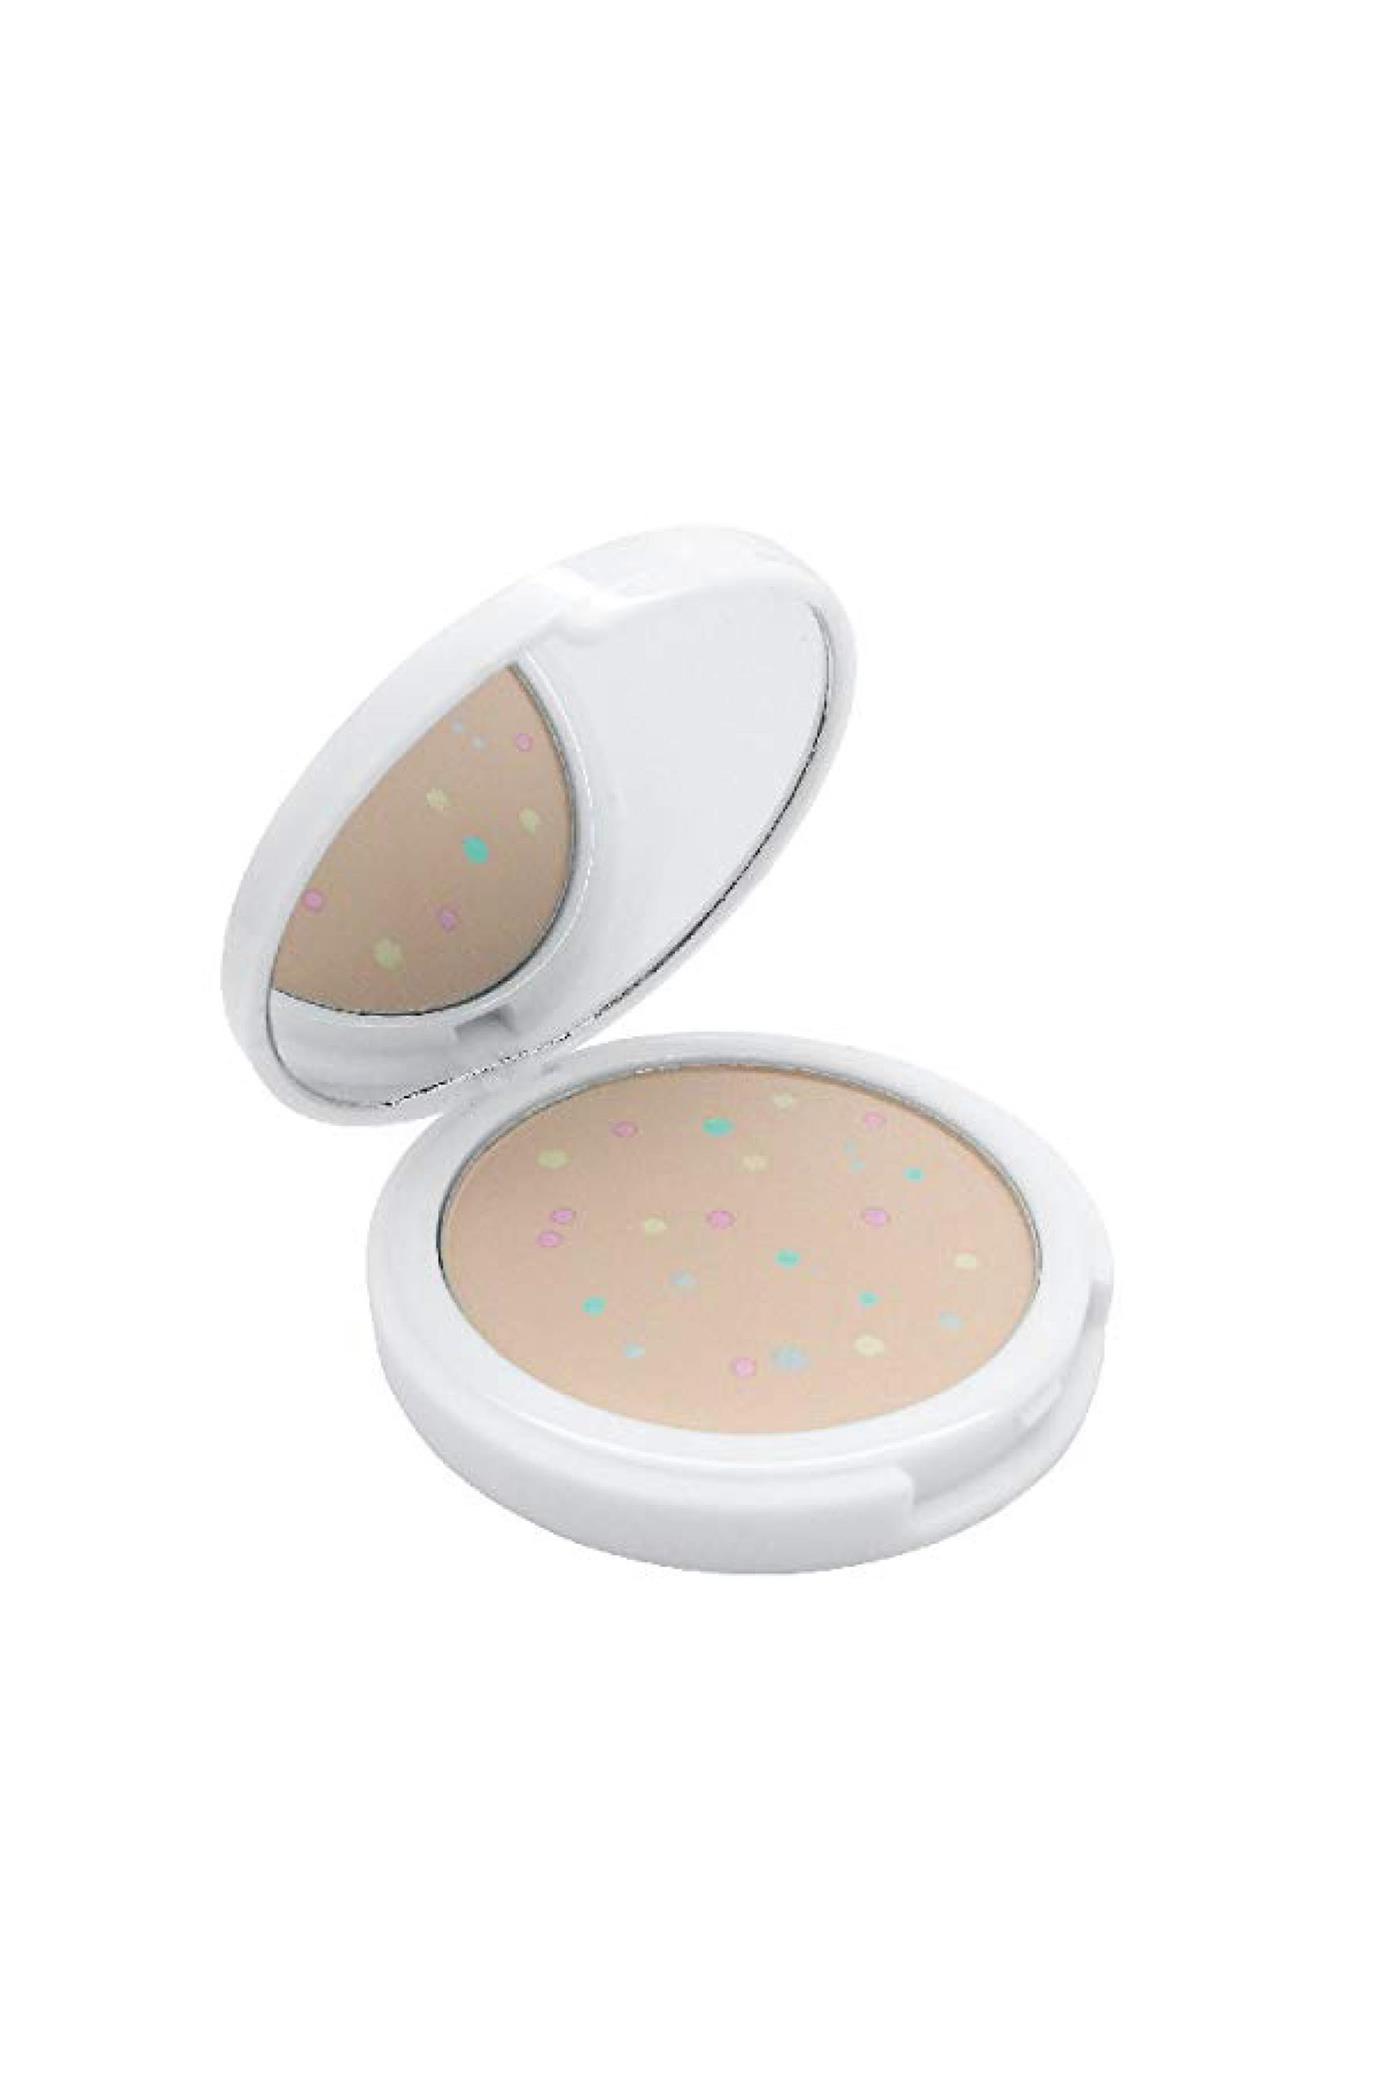 W7 maquillaje low cost. W7 Flawless Face Color Correcting Mineral Powder